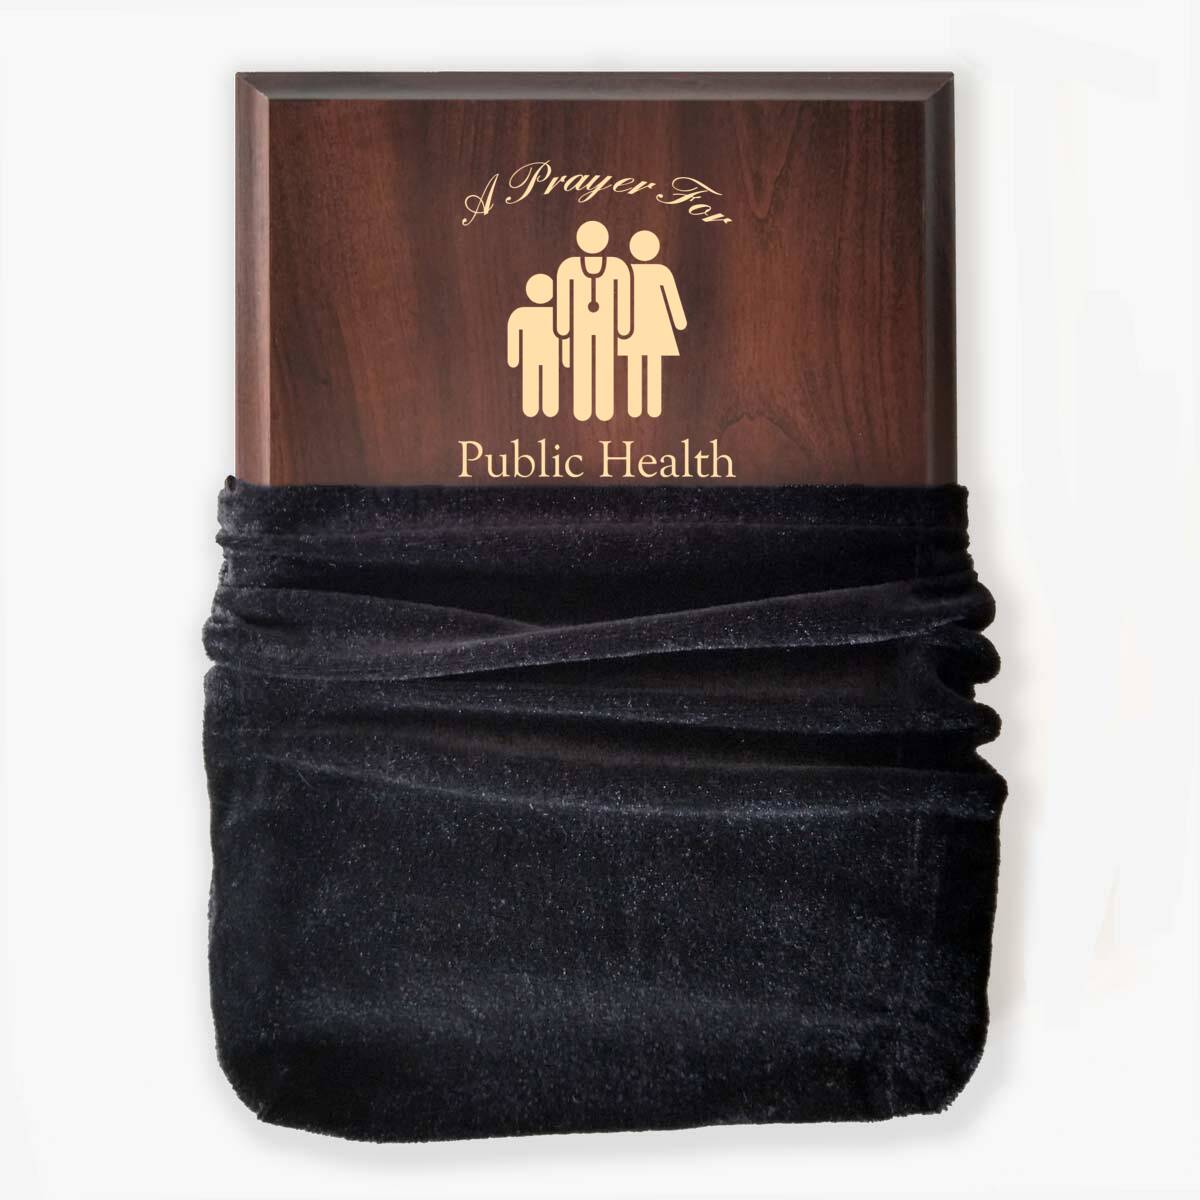 Photo of plaque inside the optional velvet gift bag, showing some of the printed design.